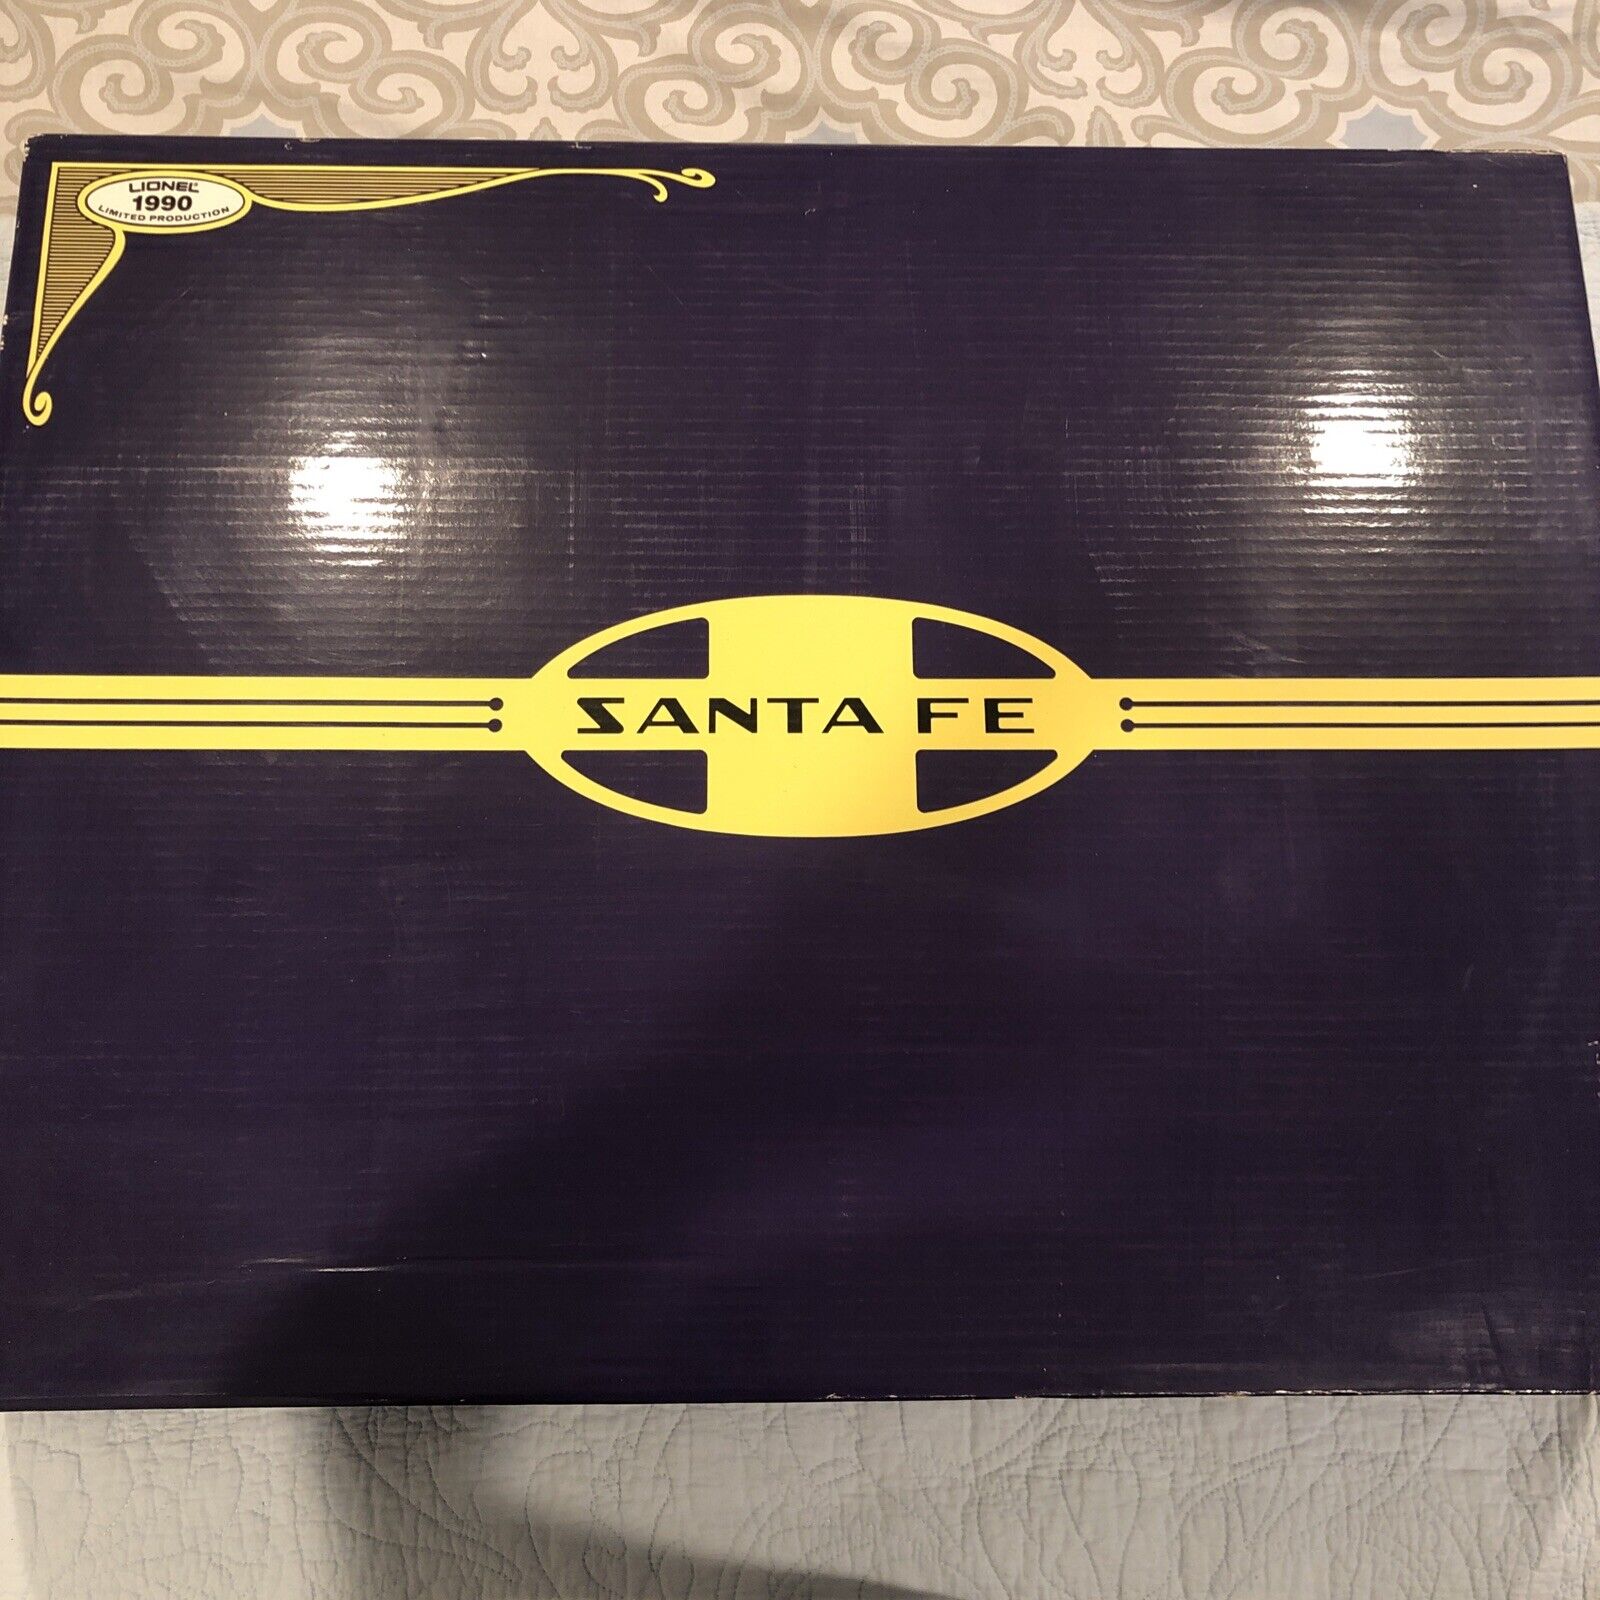 Lionel 6-11713 Santa Fe  Limited Production Freight Set with Rail Sounds